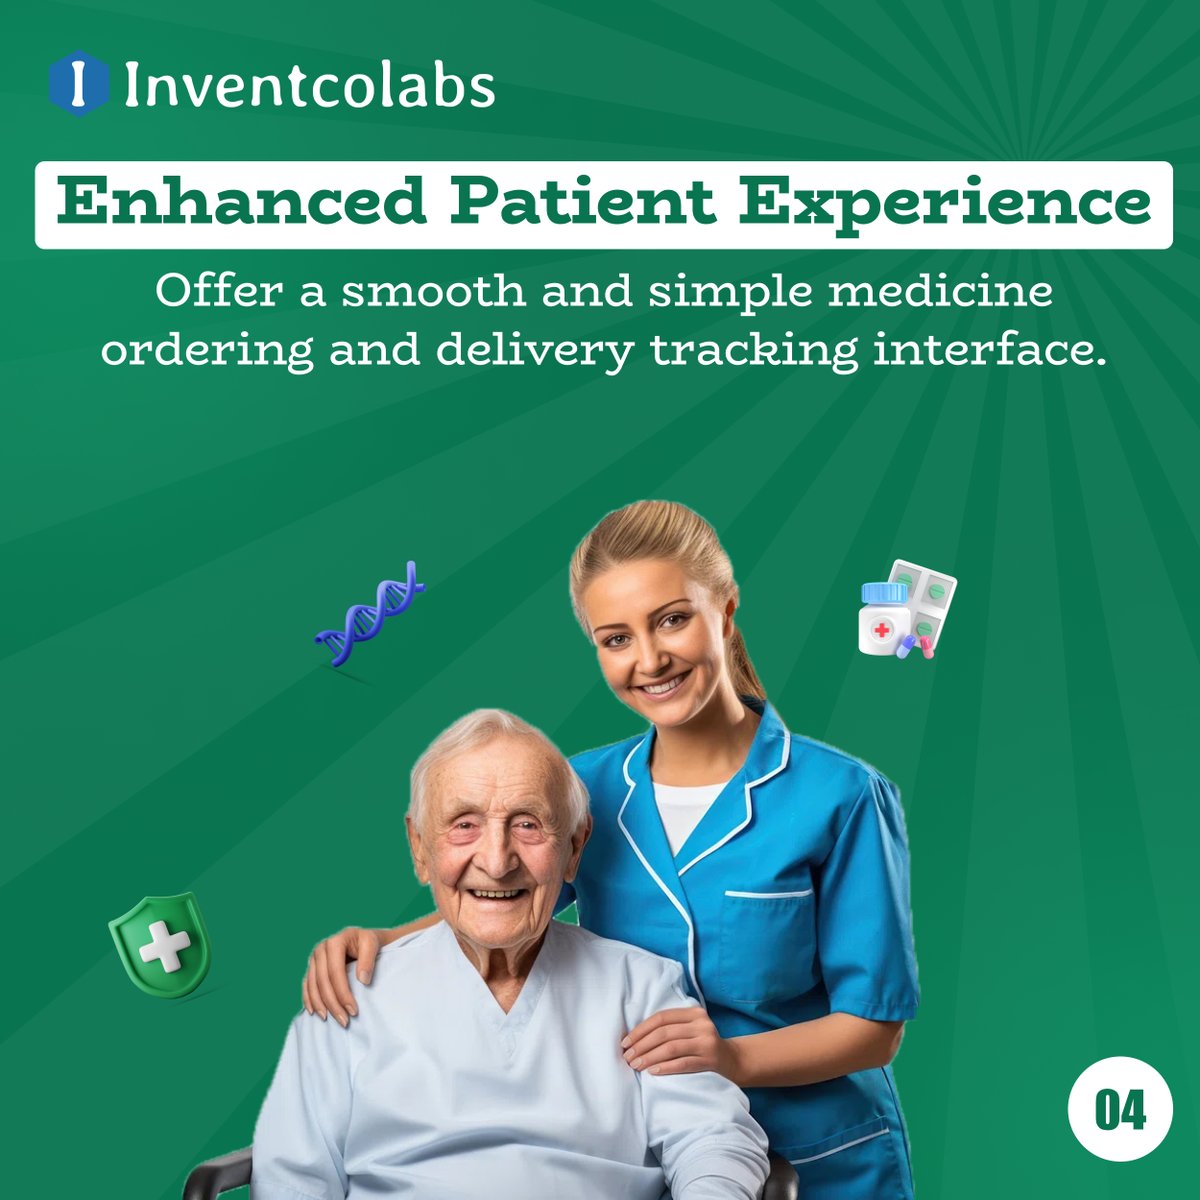 Discover the top benefits of developing a medicine delivery app like NowRx.

#medicinedelivery #pharmacyapp #healthtech #medicinedeliveryapp #healthcareinnovation #digitalhealth #ondemandhealth #mobilehealthcare